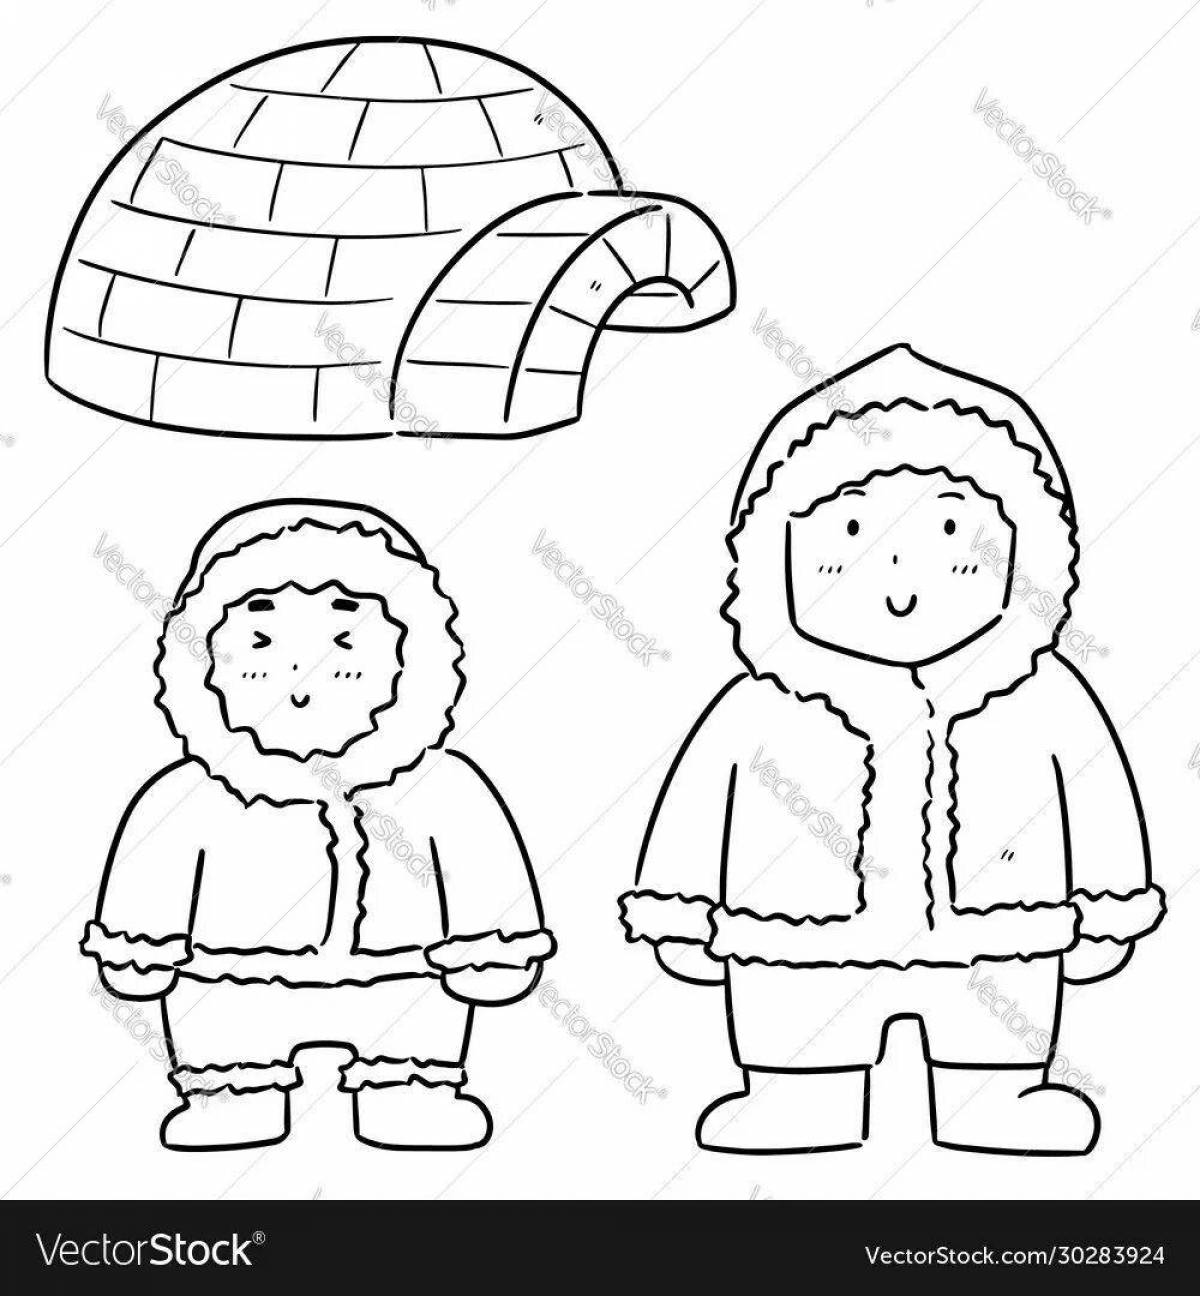 Glorious eskimo children's coloring pages